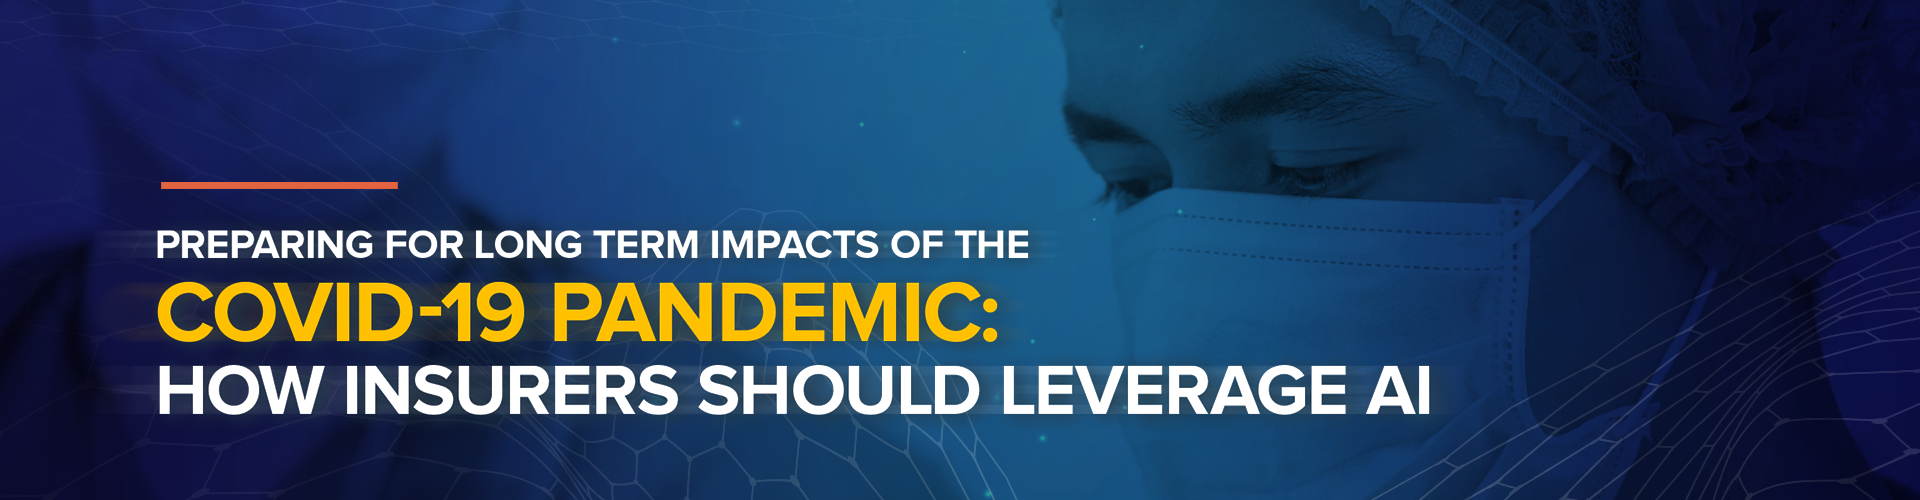 Preparing for Long Term Impacts of the COVID-19 Pandemic: How Insurers Should Leverage AI